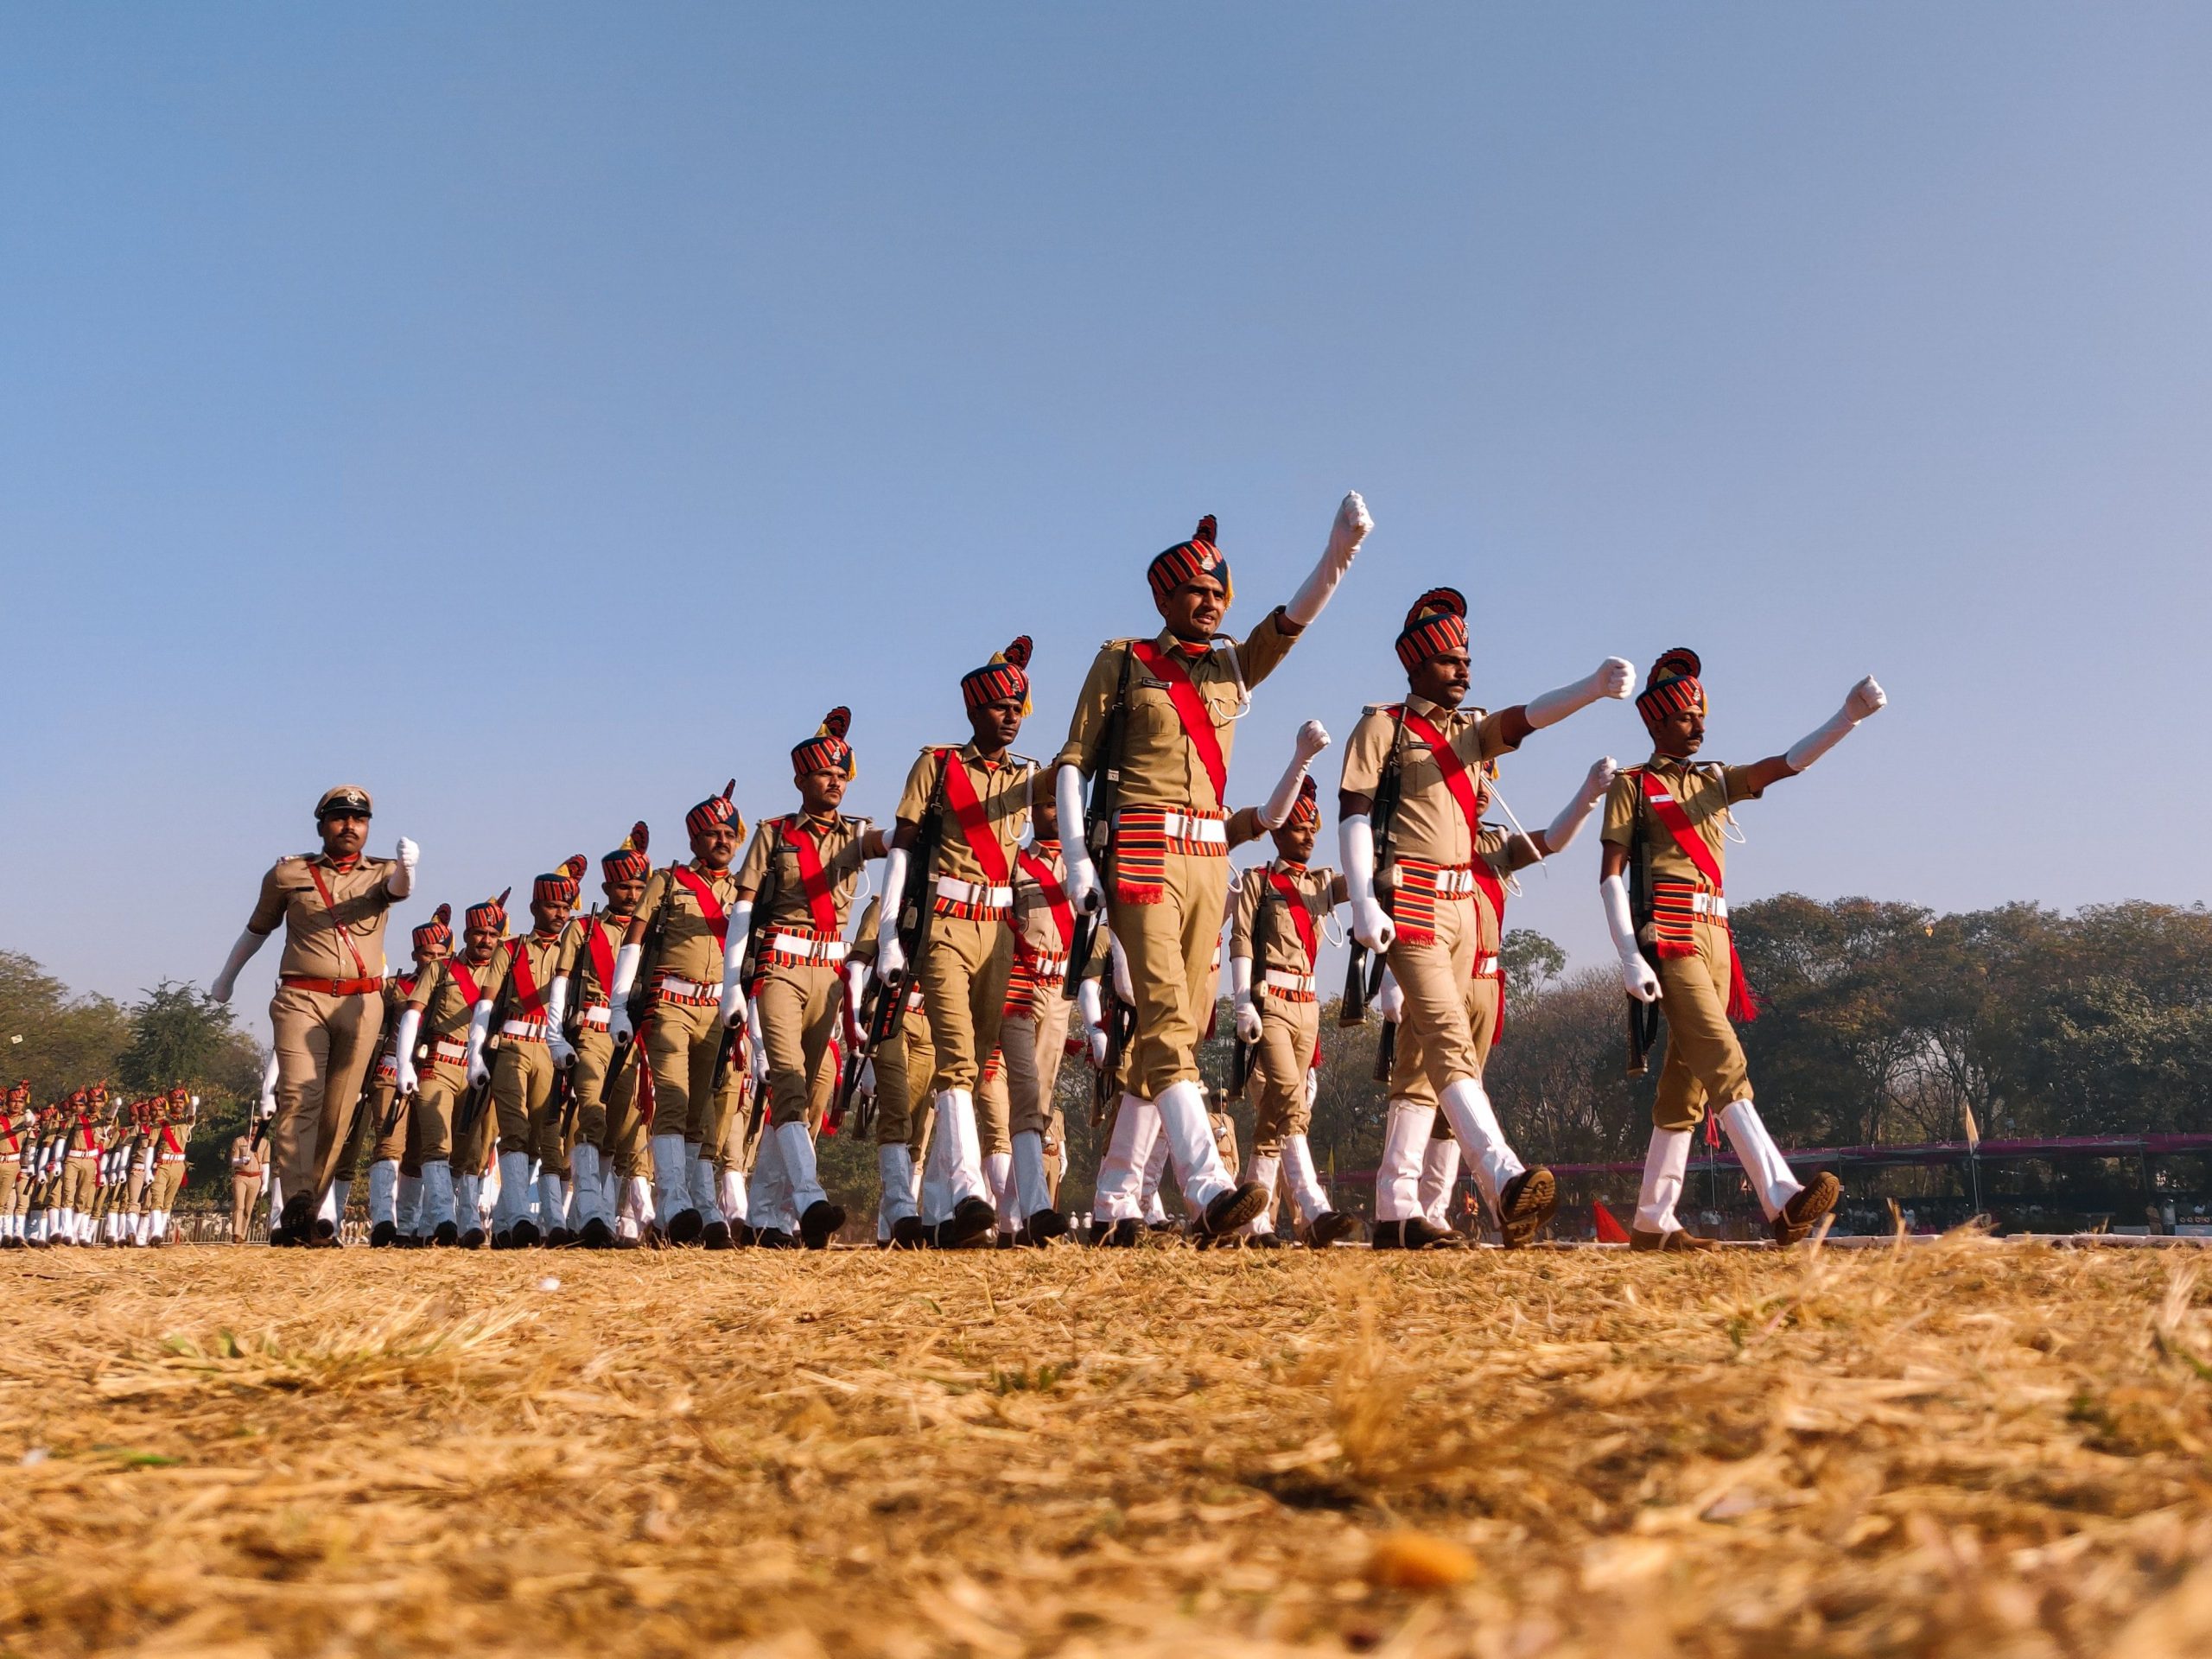 On the eve of Indian Army Day, we look back at some of the notable Indian Army moments